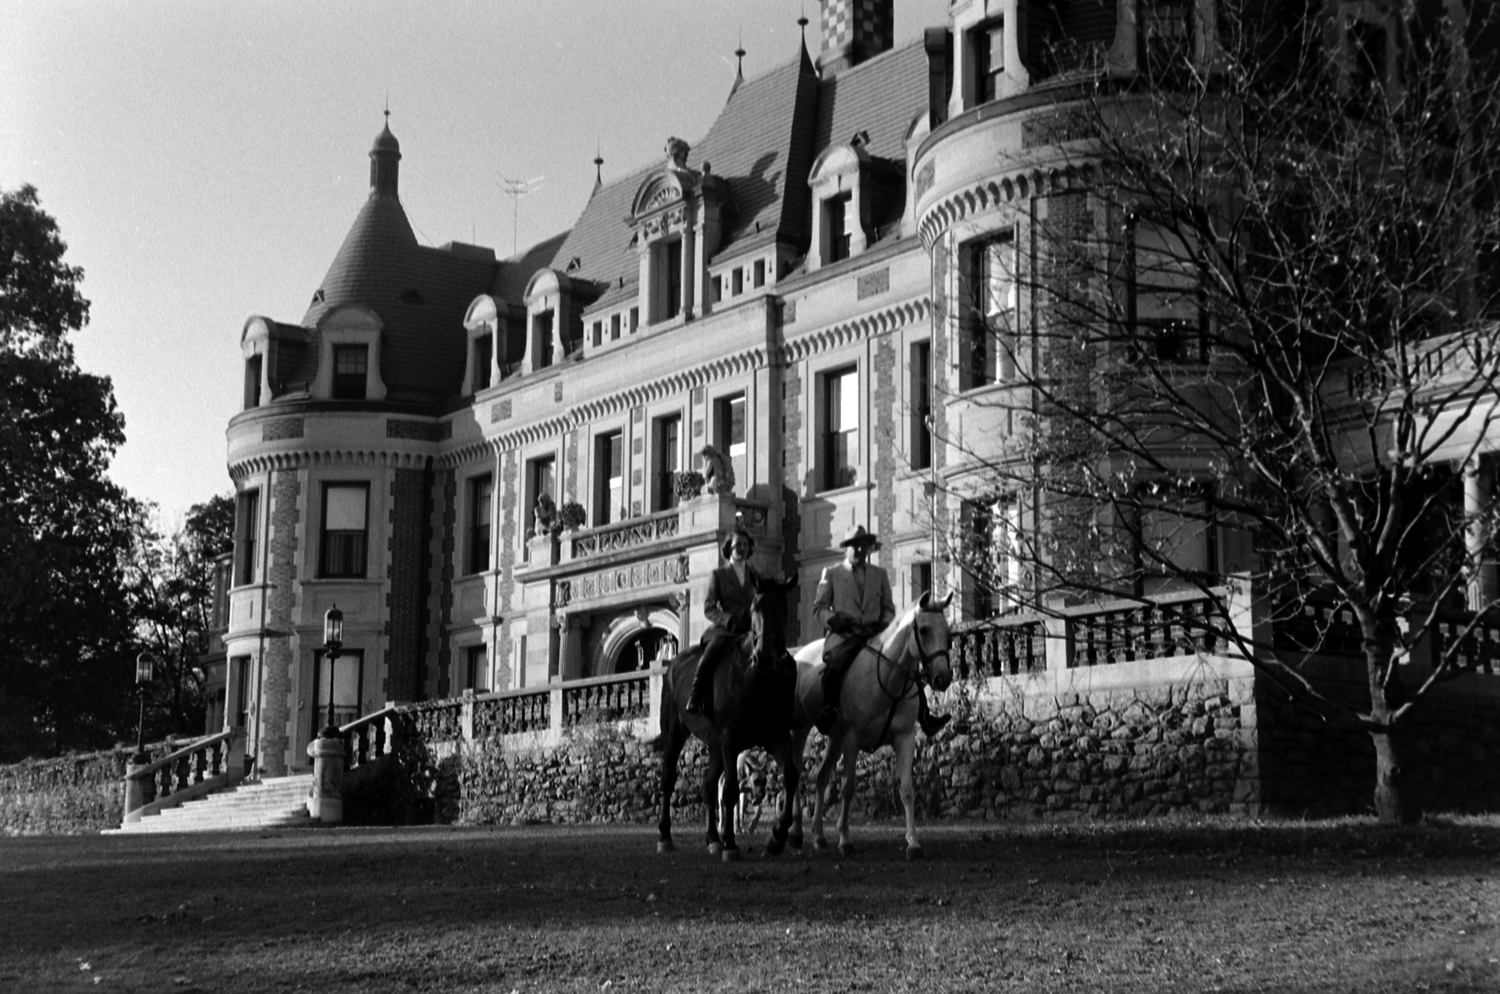 Out for the daily ride, Trudy astride Happy Landing and Gussie on Miss Budweiser amble across the lawn of the 34-room brick mansion Gussie's father erected in 1911.